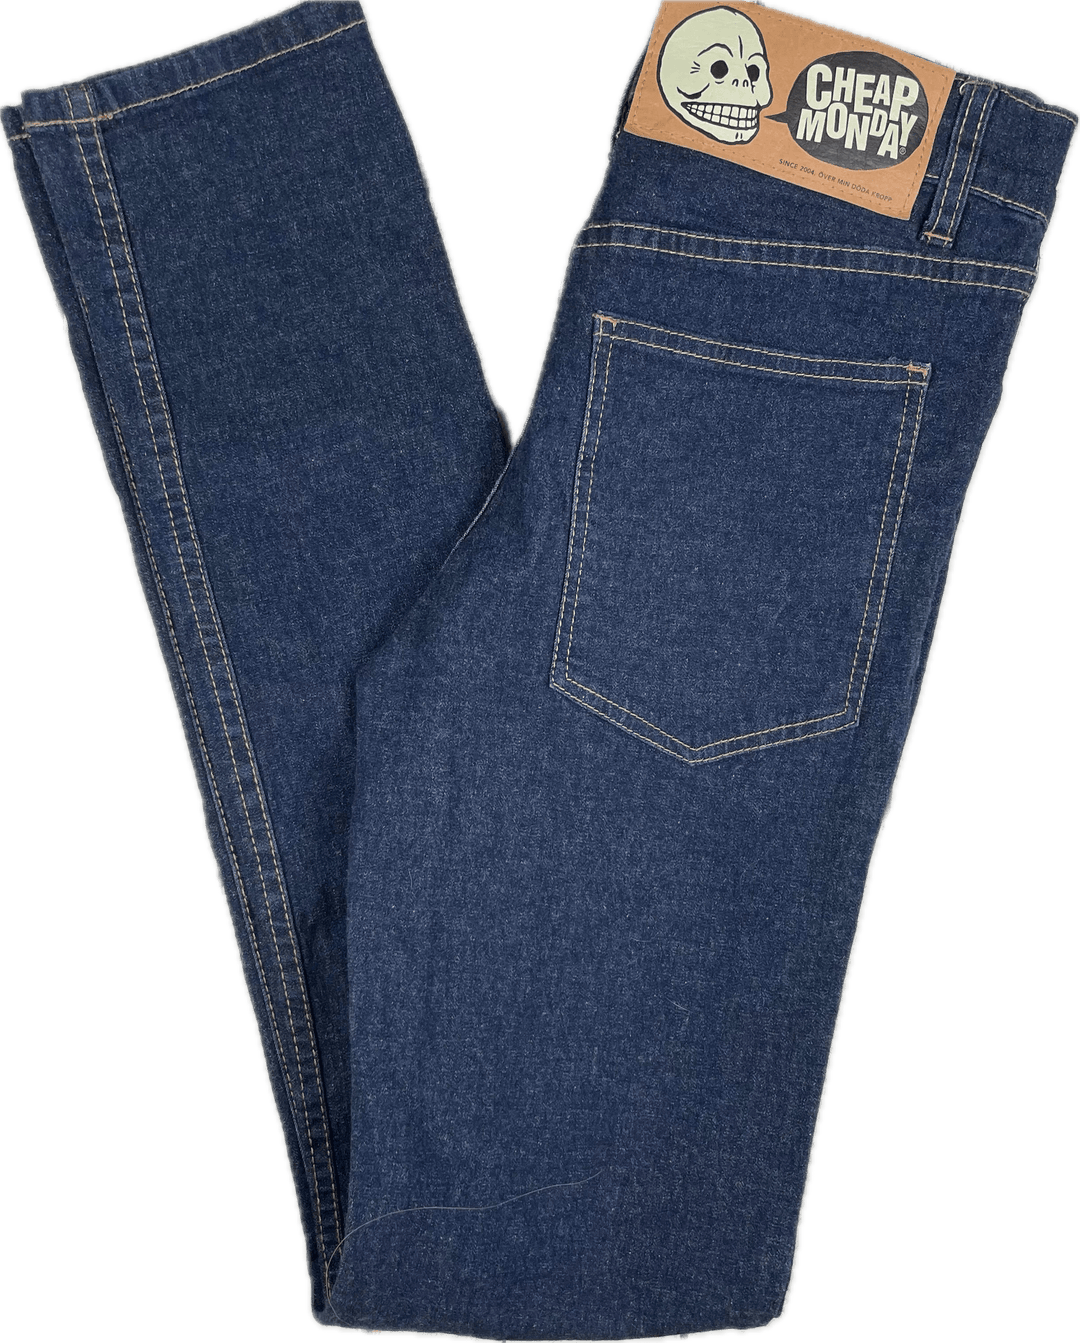 Cheap Monday 'Tight Very Stretch One Wash' Skinny Jeans - Size 29/34 - Jean Pool